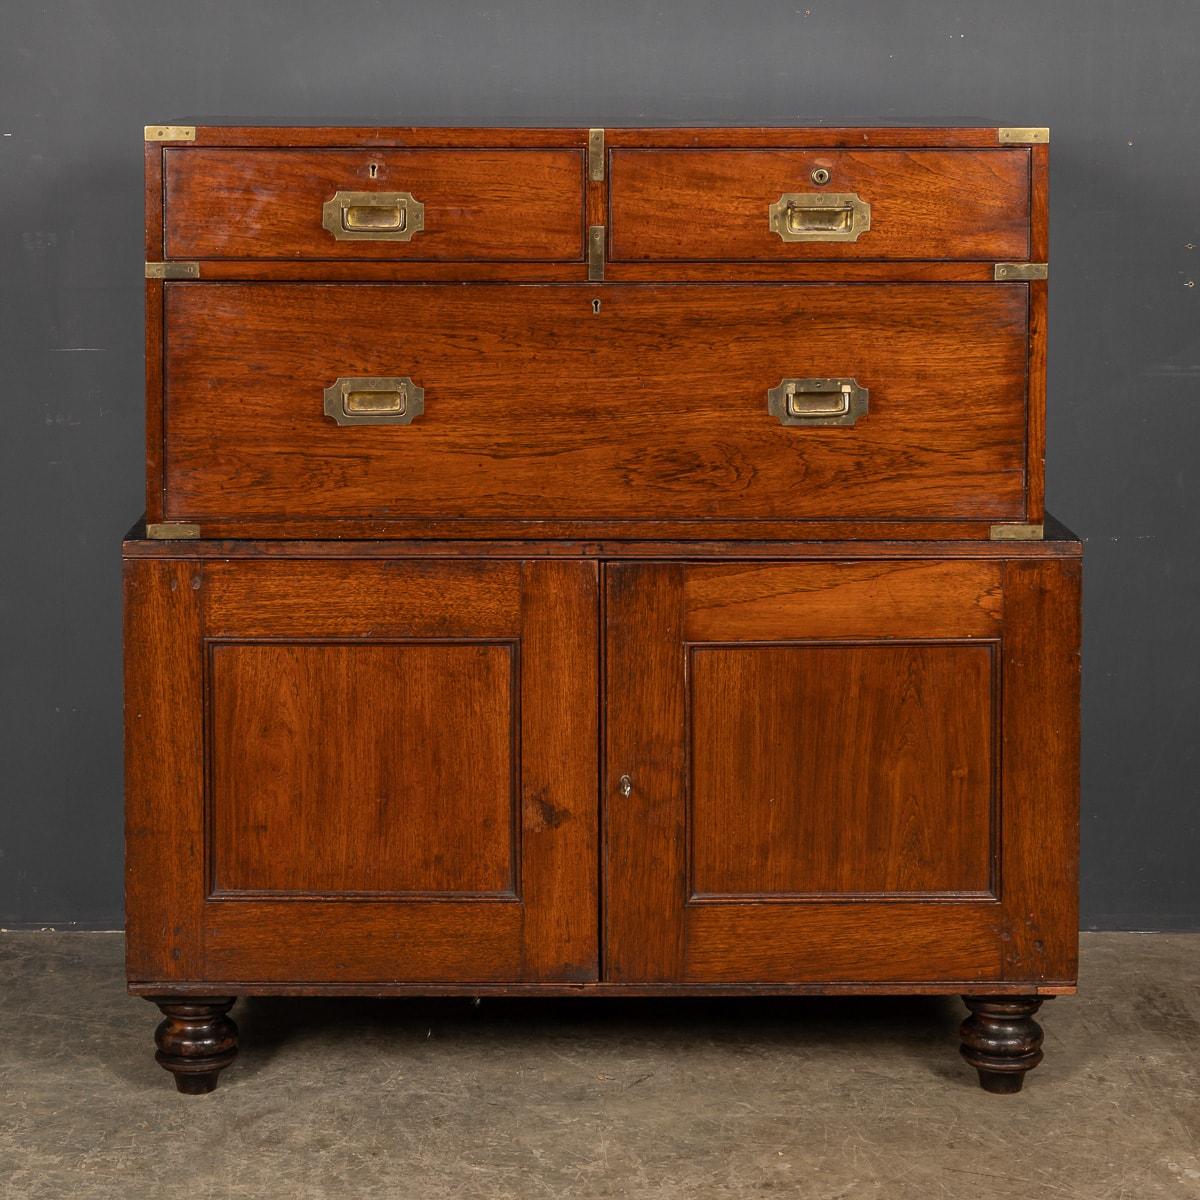 Antique 19th Century Victorian rare piece of campaign furniture, crafted in mahogany. In two pieces the top set of three drawers fitting snugly inside the lower cupboard for traveling. This piece has original brass campaign handles, lock and key